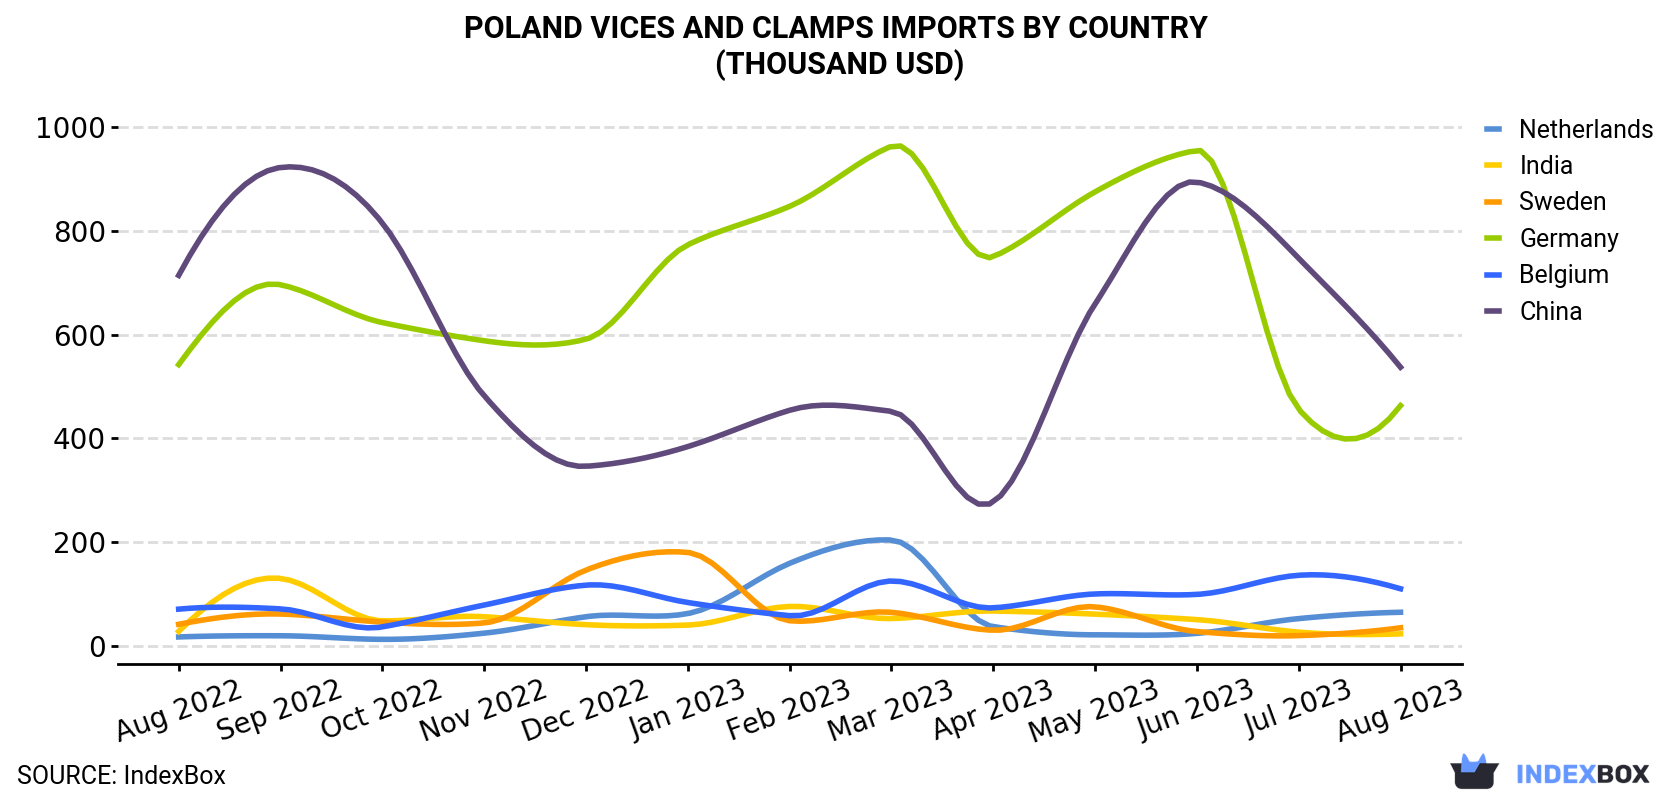 Poland Vices And Clamps Imports By Country (Thousand USD)